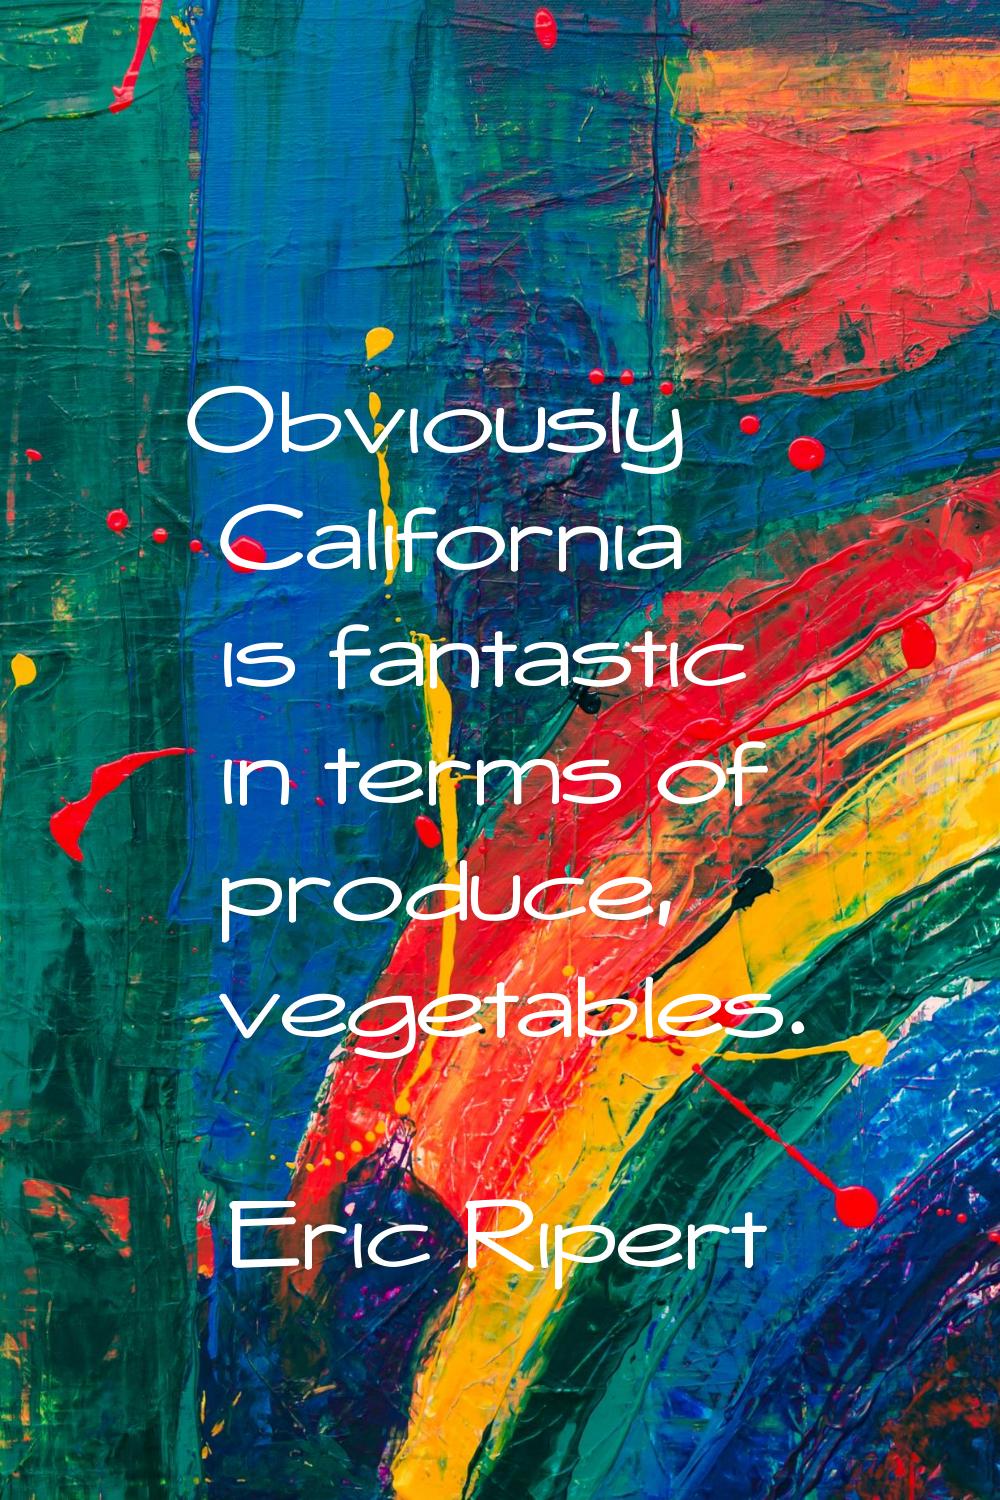 Obviously California is fantastic in terms of produce, vegetables.